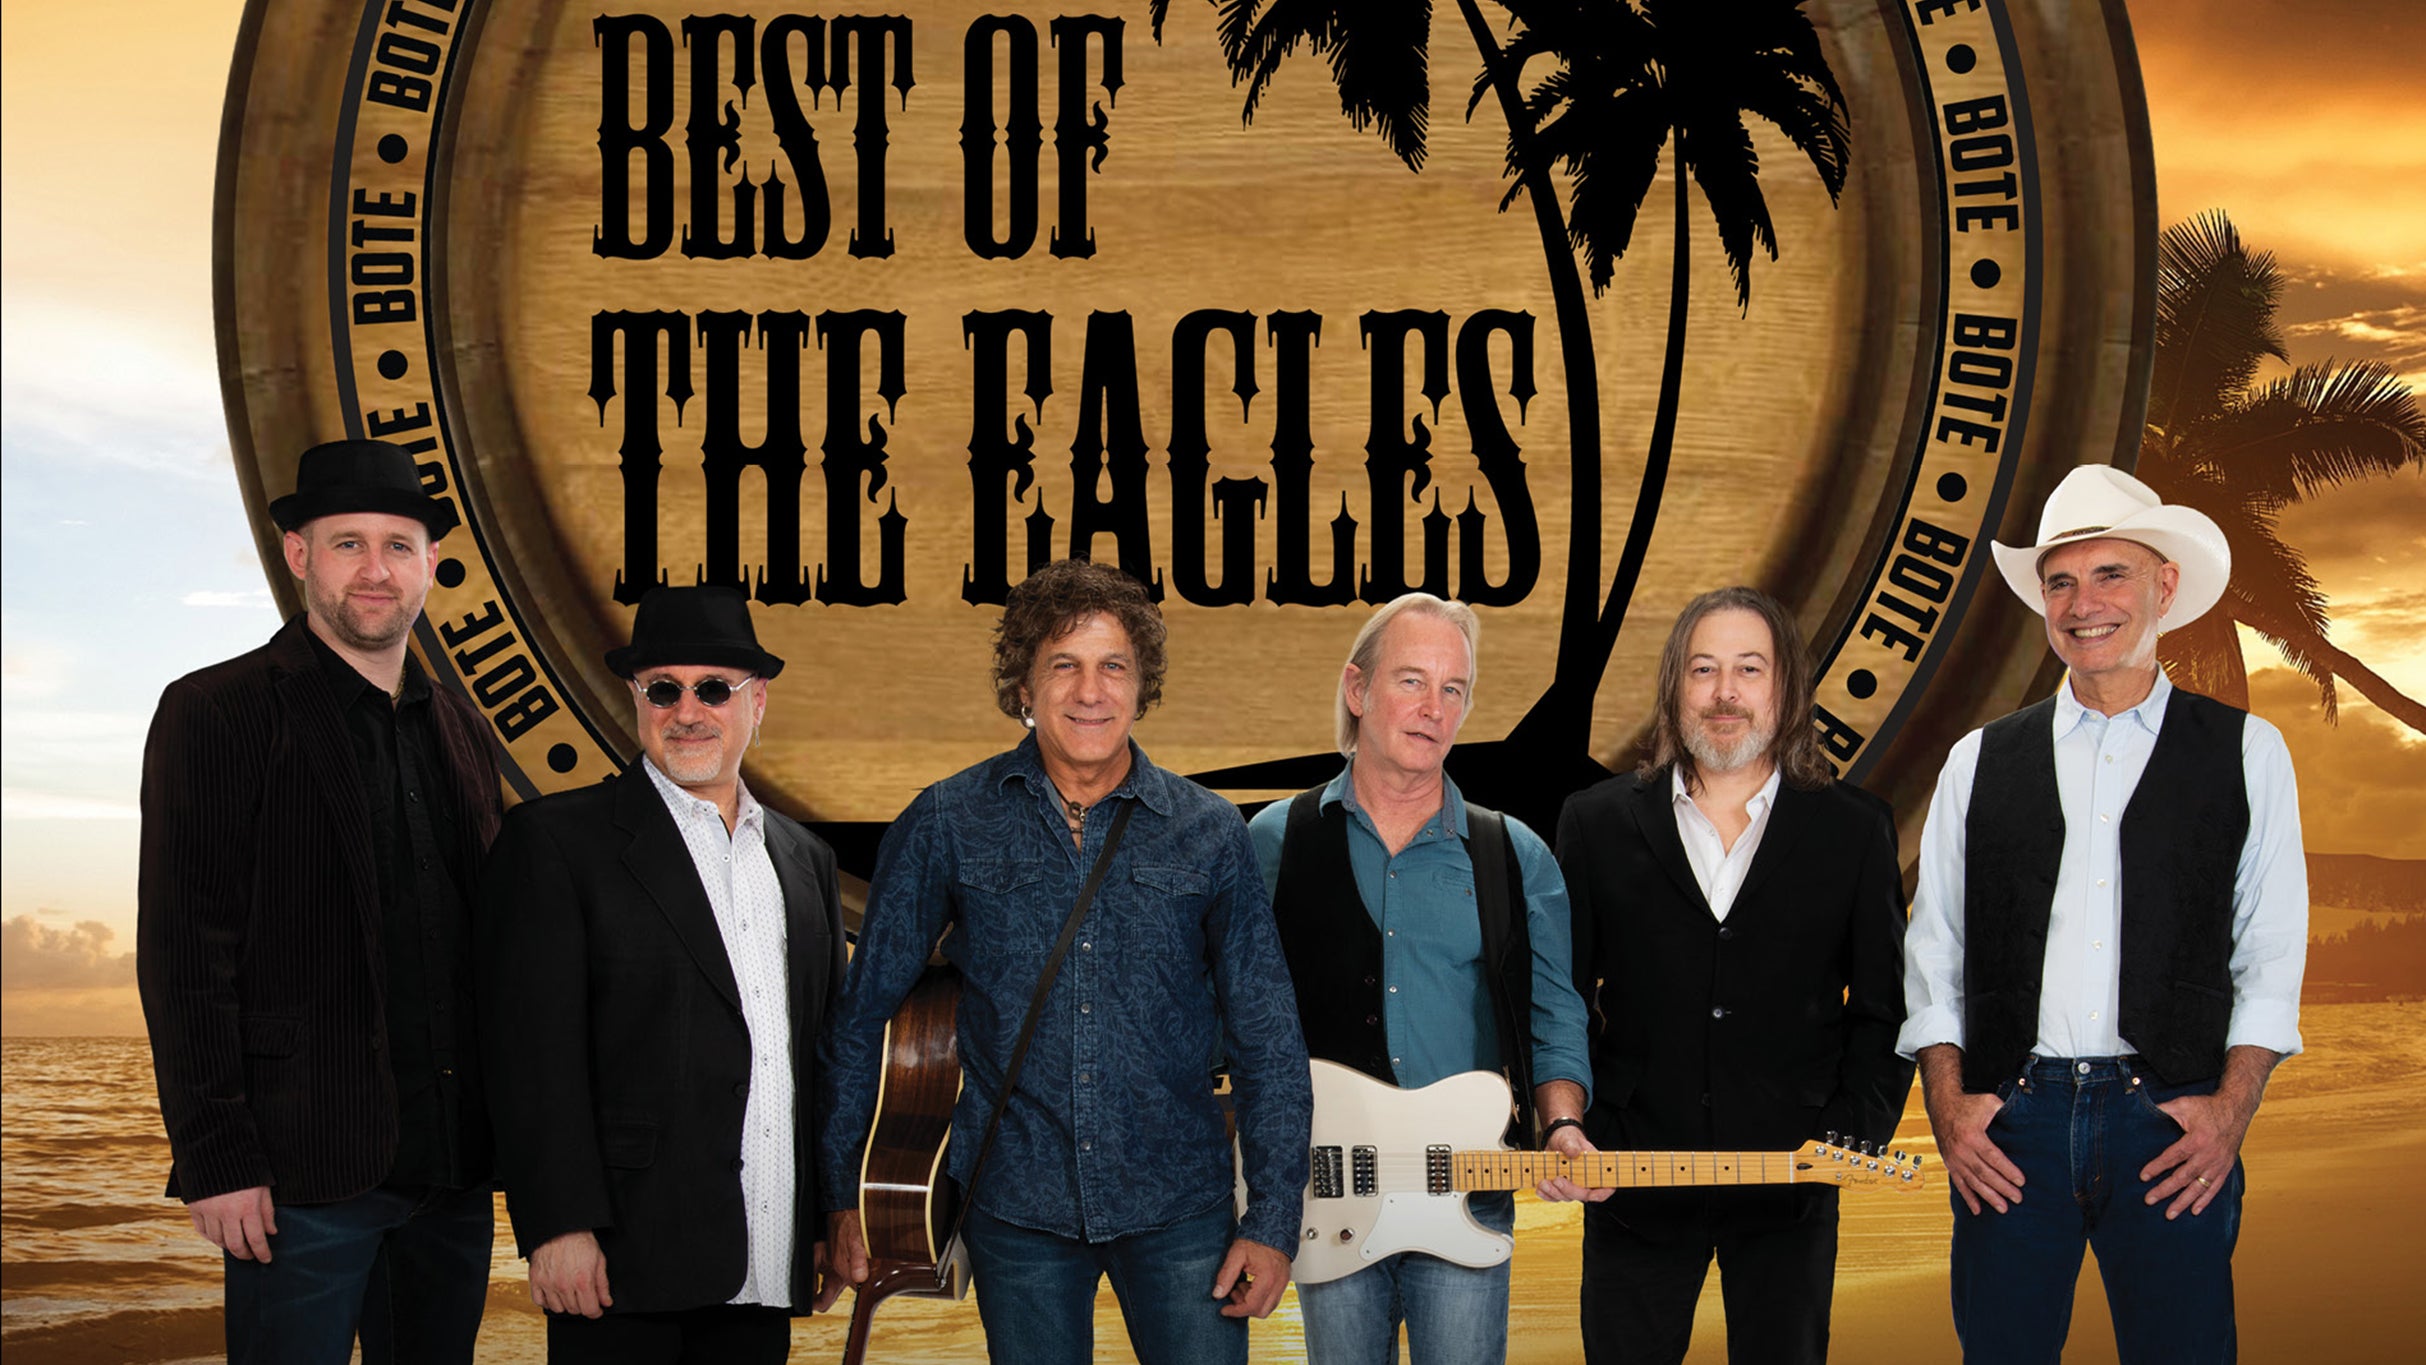 The Best of The Eagles presales in Wallingford